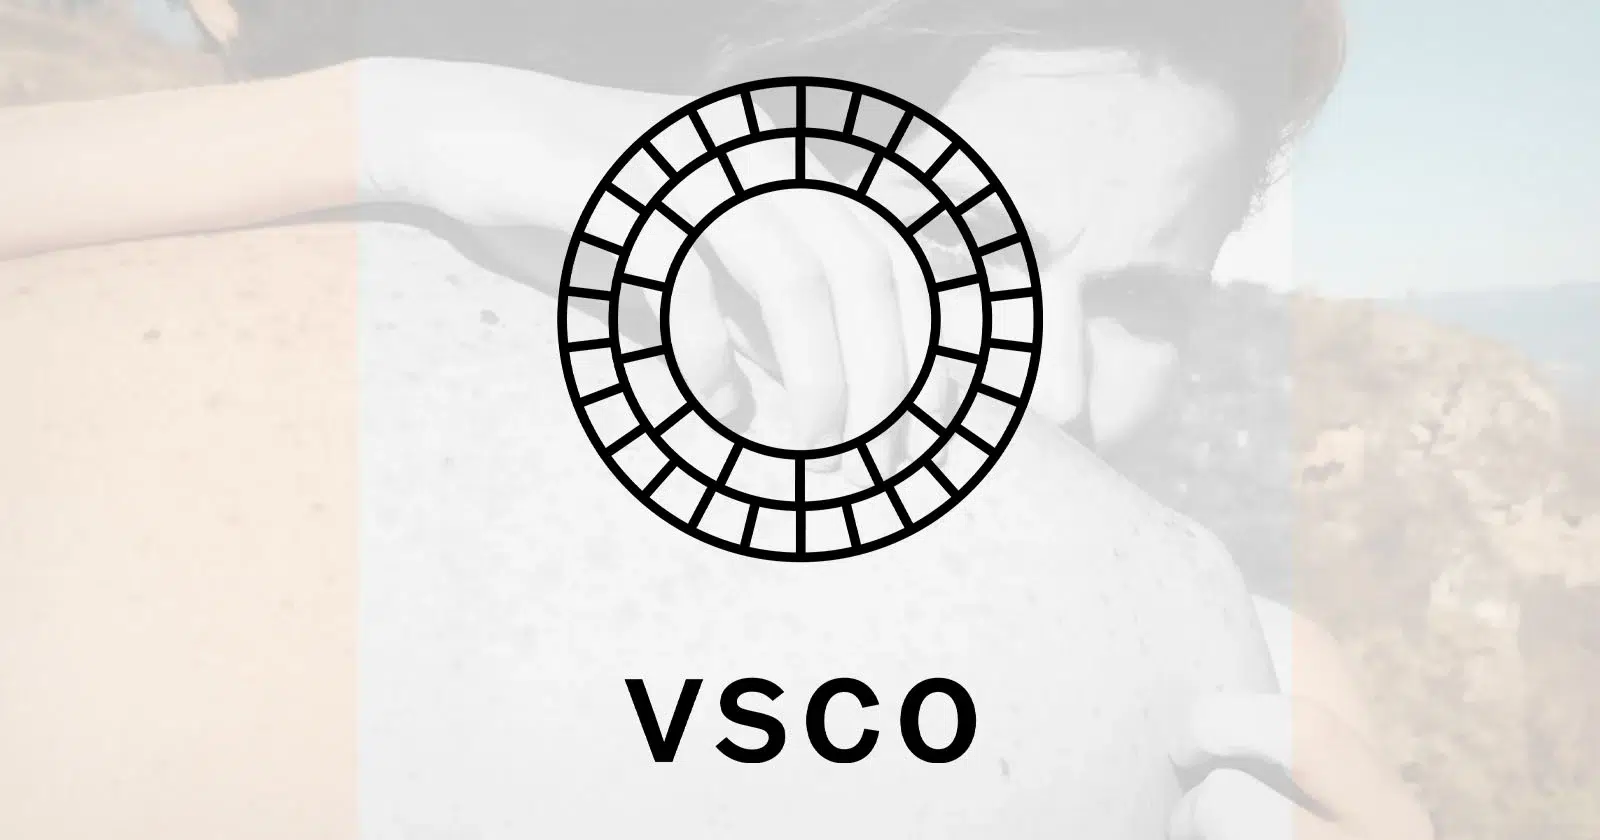 VSCO is Relaunching to Focus on Serving More Serious Creatives